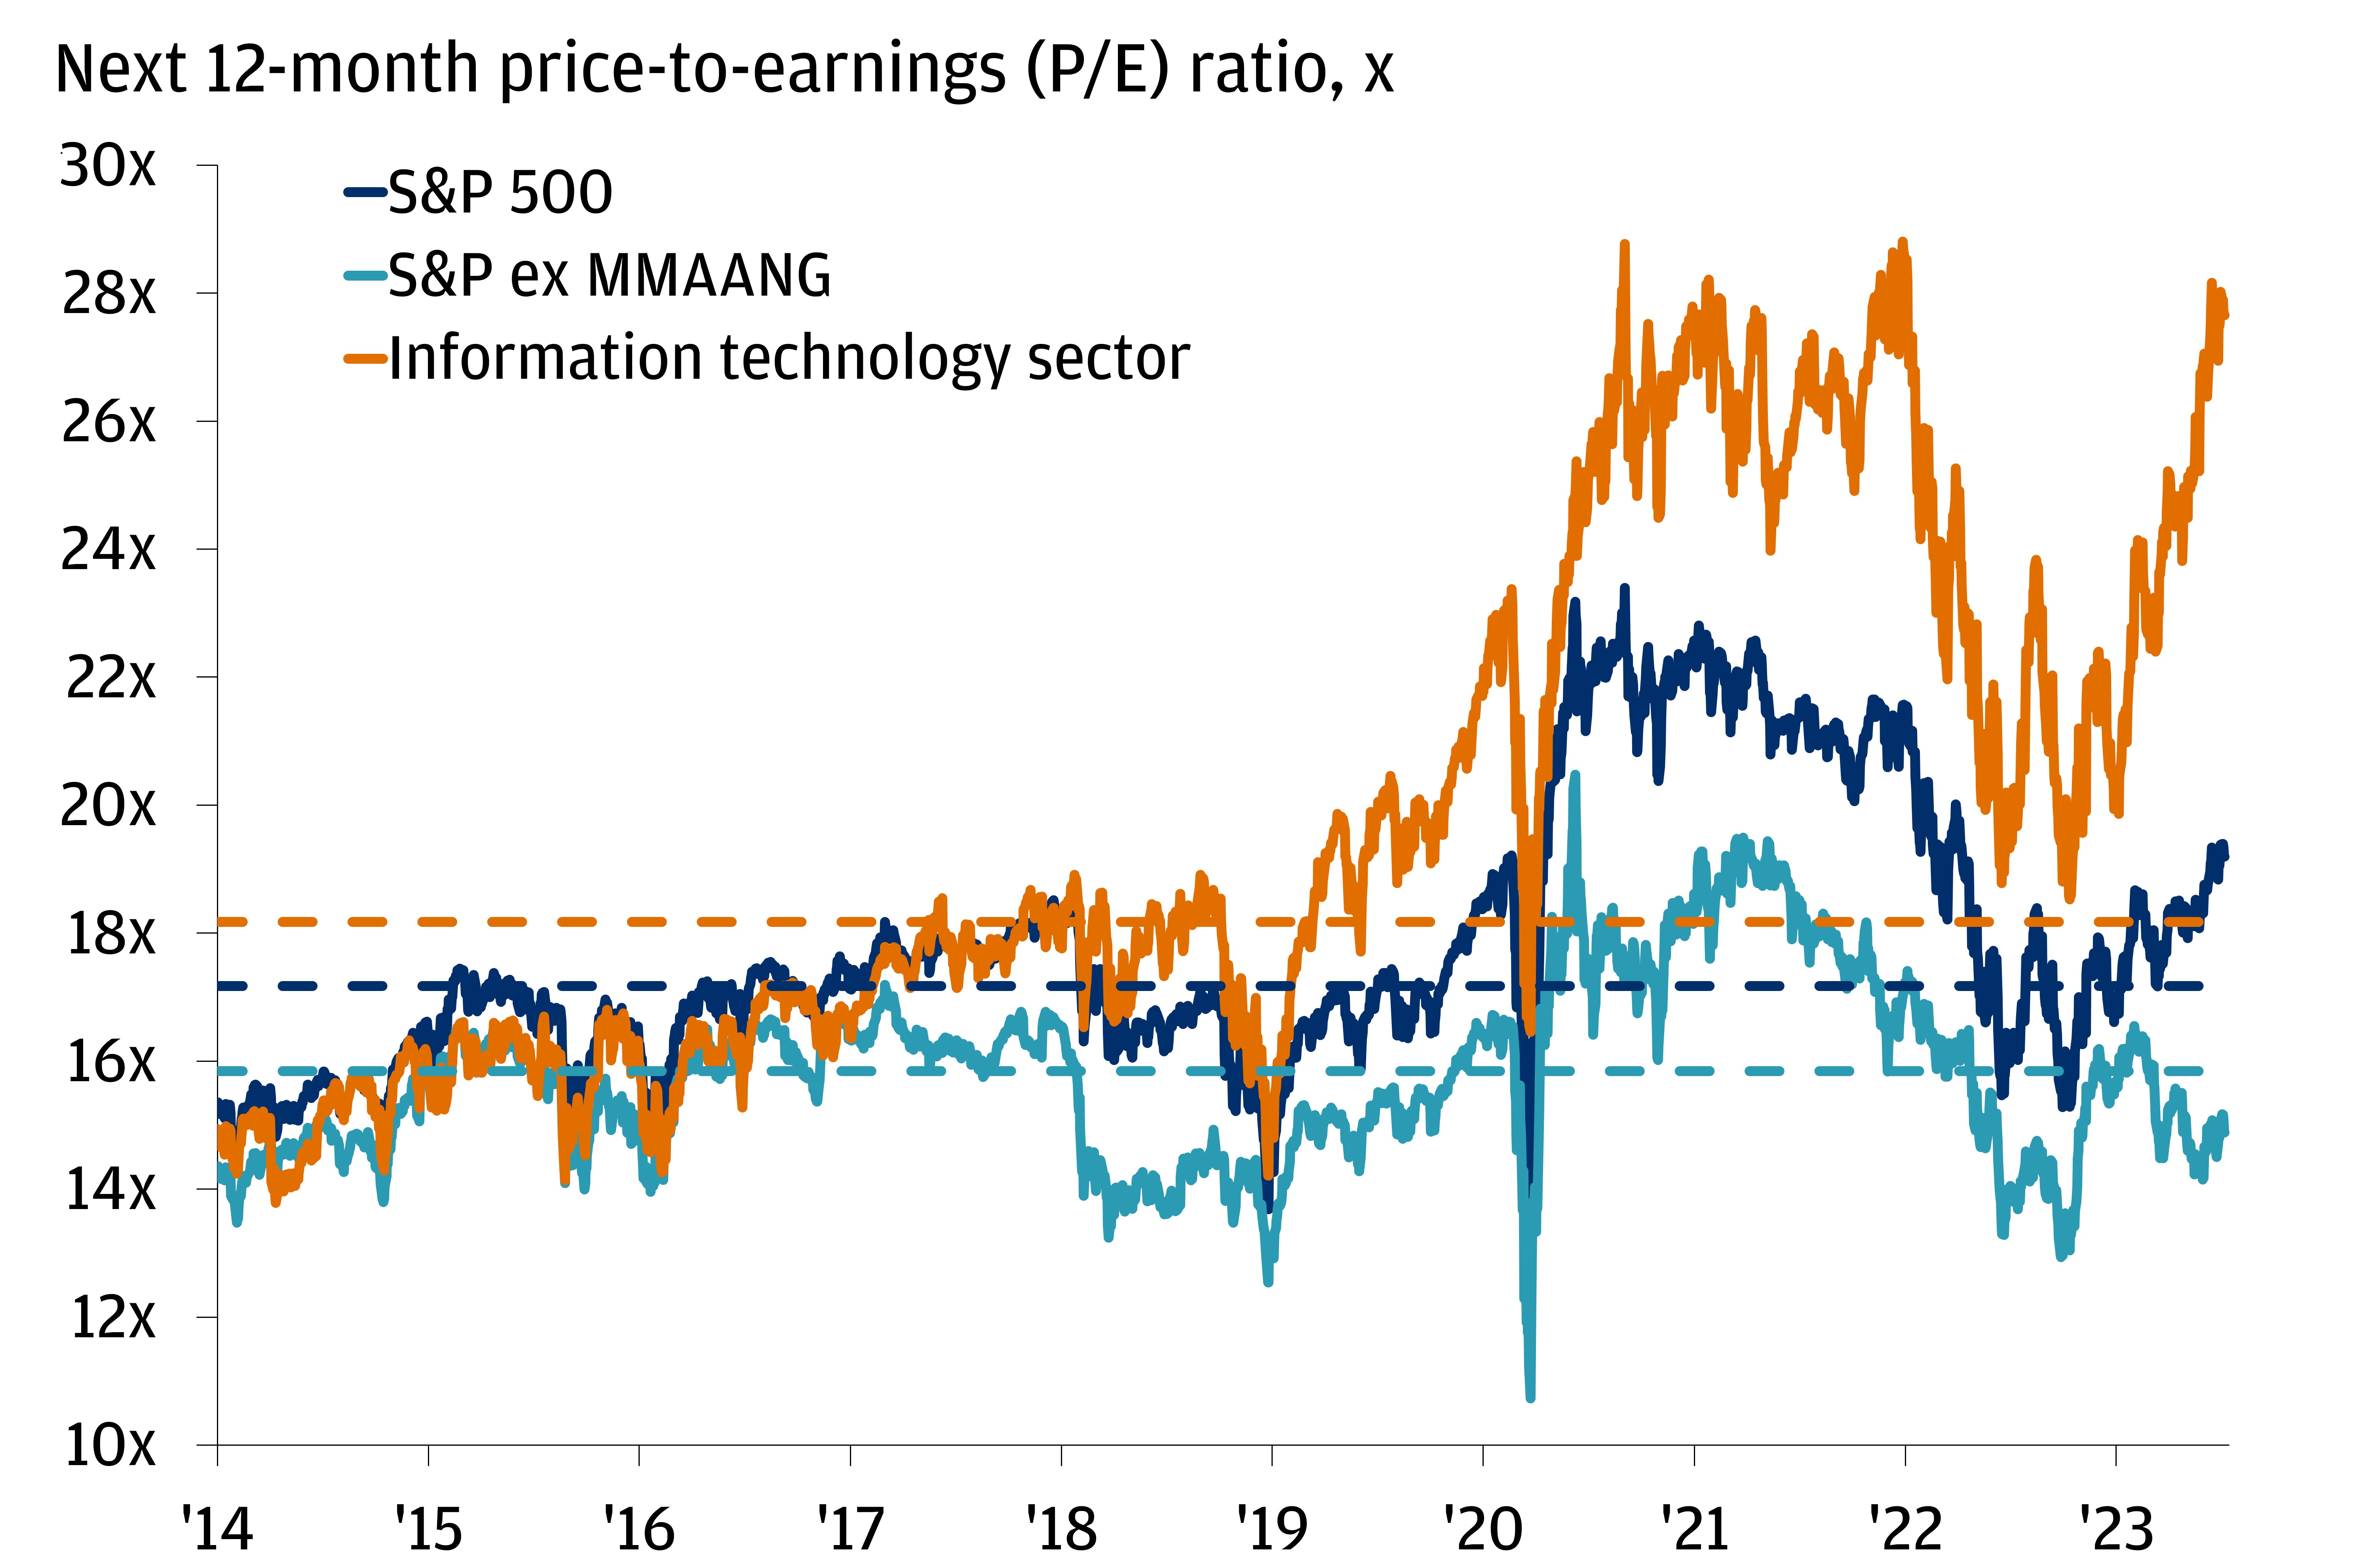 This chart shows the next 12-month price-to-earnings ratio for the S&P 500, S&P 500 ex-MMAANG (Meta, Microsoft, Amazon, Apple, Nvidia, Google), and the information technology sector from January 2014 to July 2023.